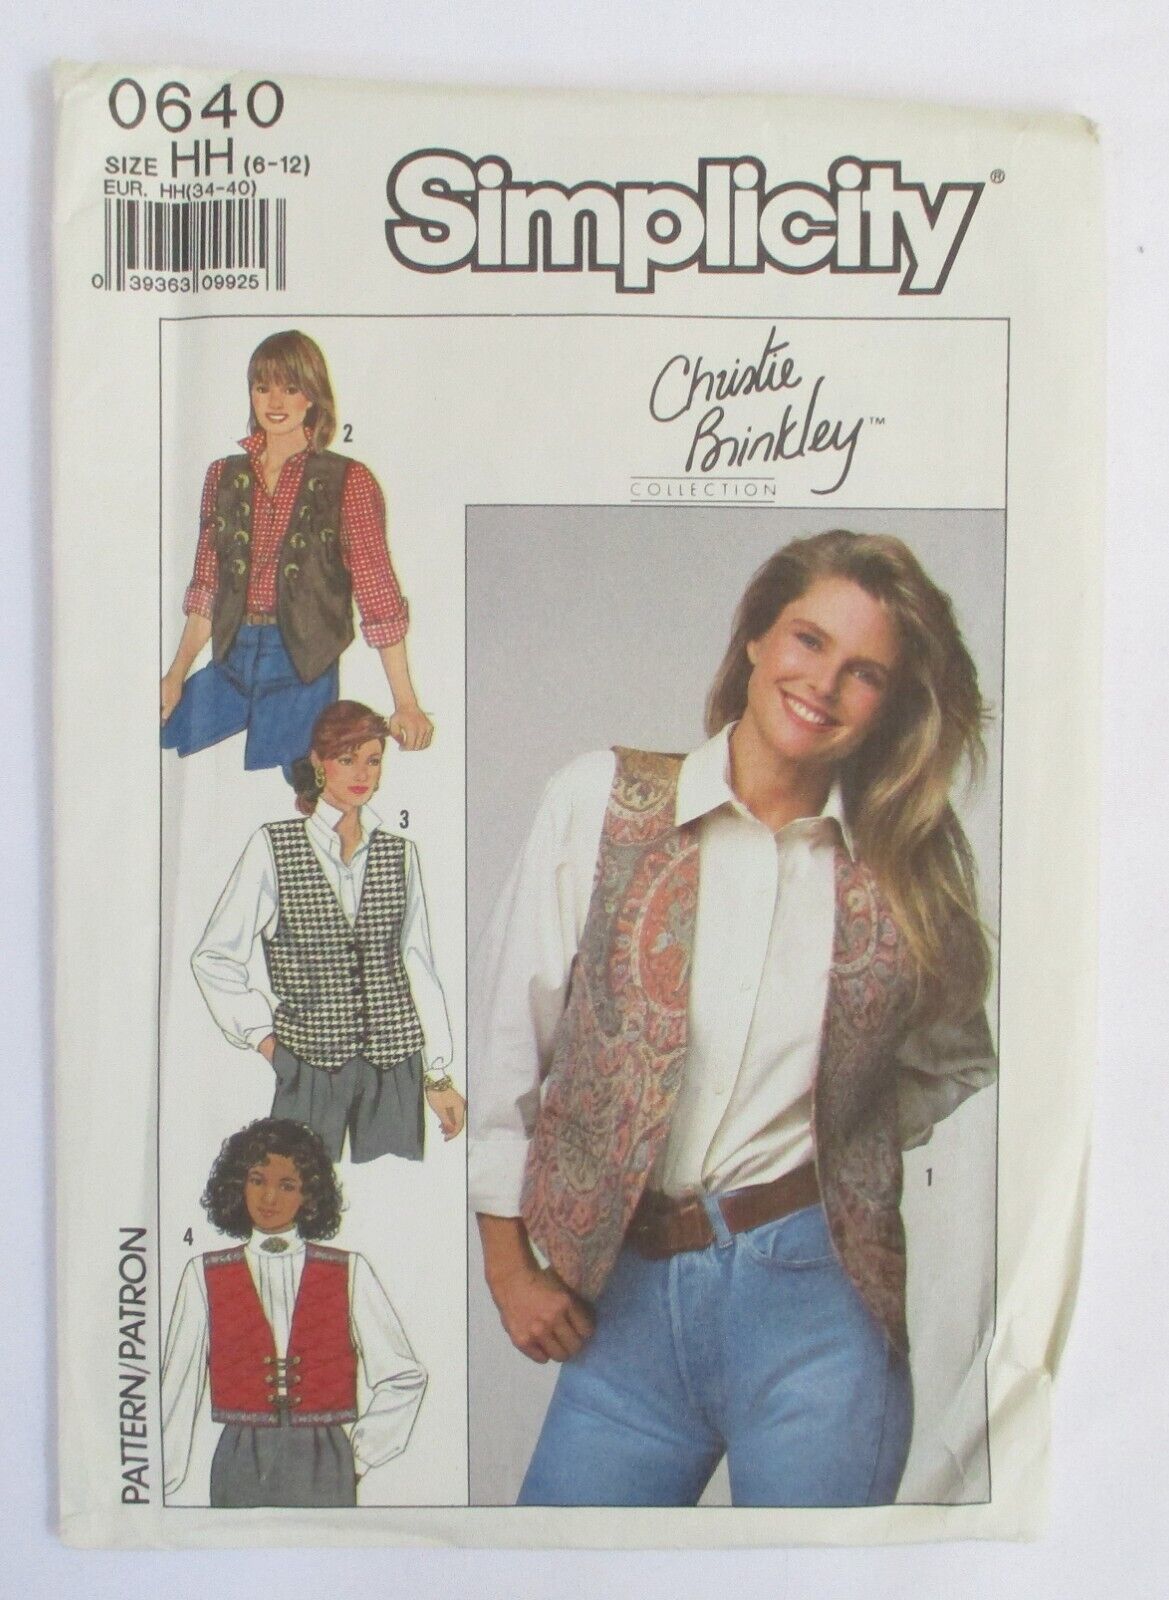 Primary image for Simplicity 0640 Size 6-12 Christie Brinkley Collection Vests 1989 UNCUT